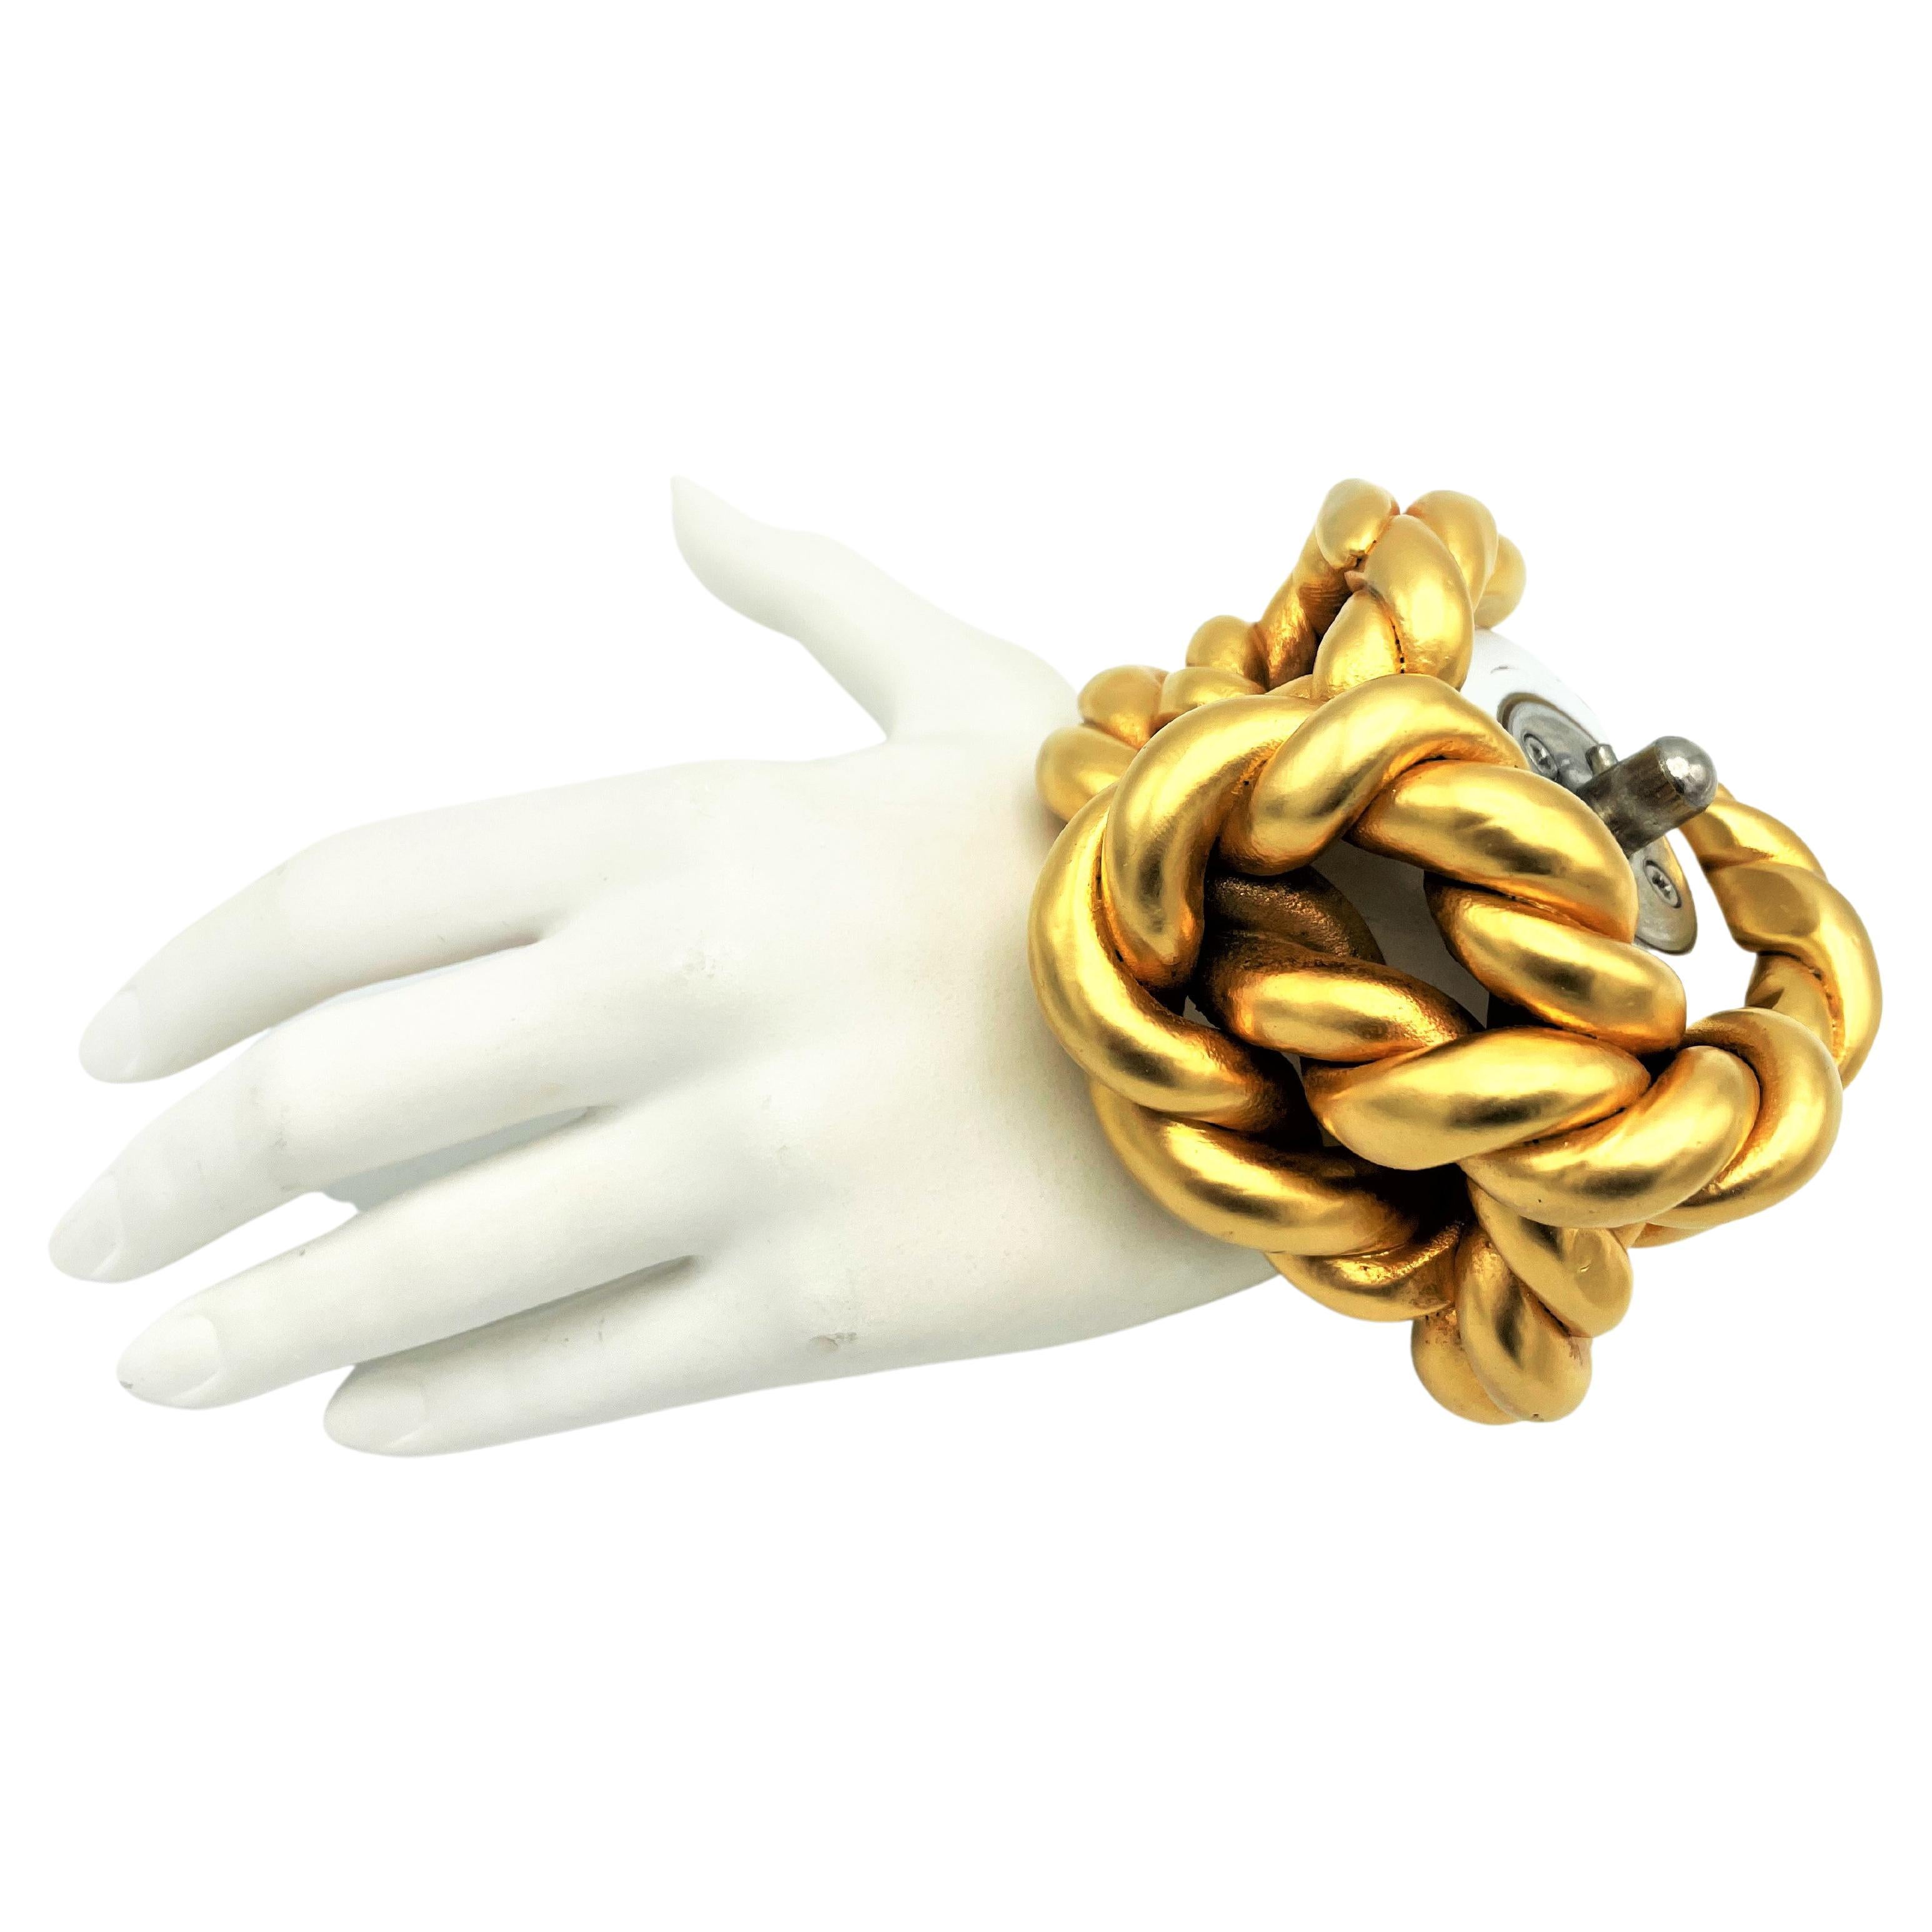 Impressive unsigned Chanel cuff/bracelet in the shape of a large cord designed by Victoire de Castellane in the 1980s, gold plated resin.  A thick cord winds from one end to the other. 
This  cuff must be for a small wrist!

Measurement: height of